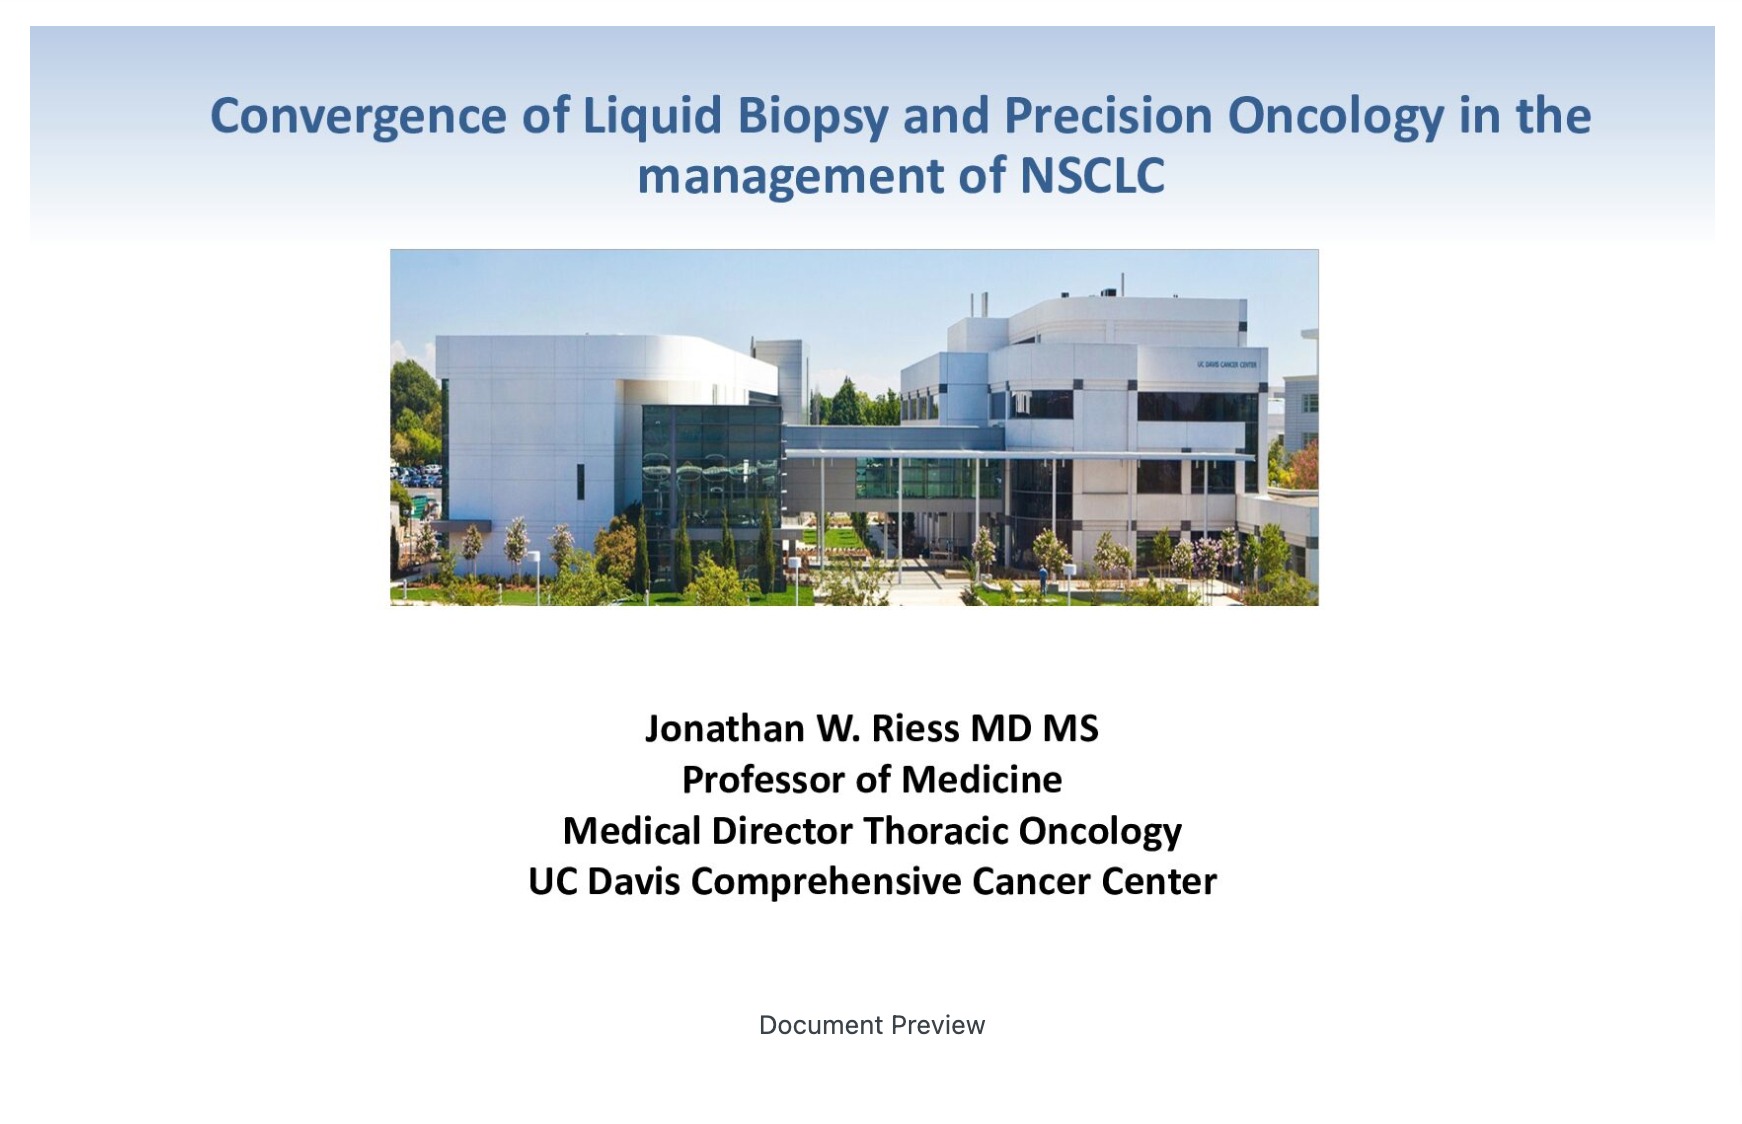 Convergence of Liquid Biopsy and Precision Oncology in the Management of NSCLC